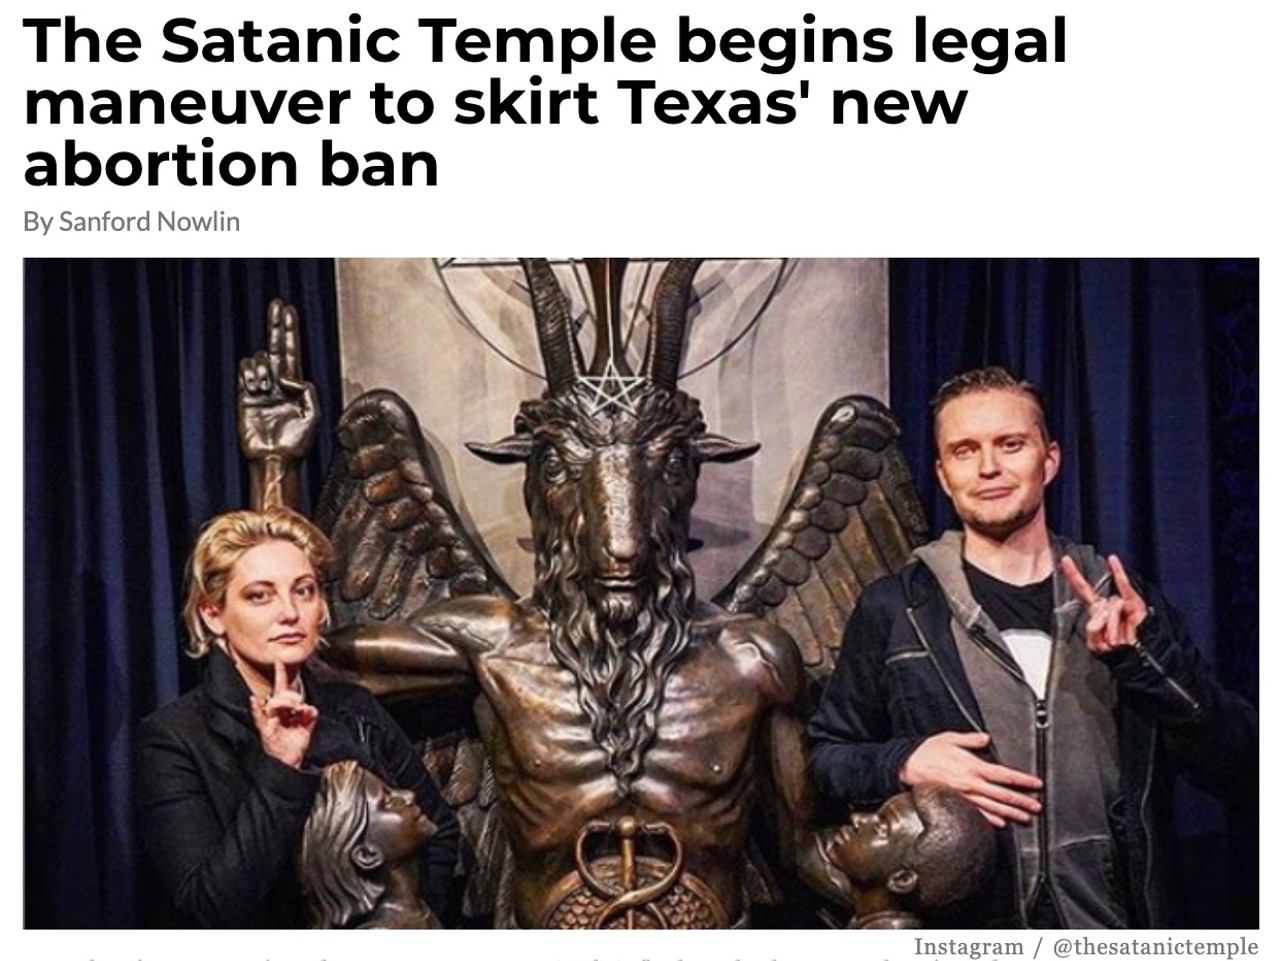 2. The Satanic Temple begins legal maneuver to skirt Texas' new abortion ban